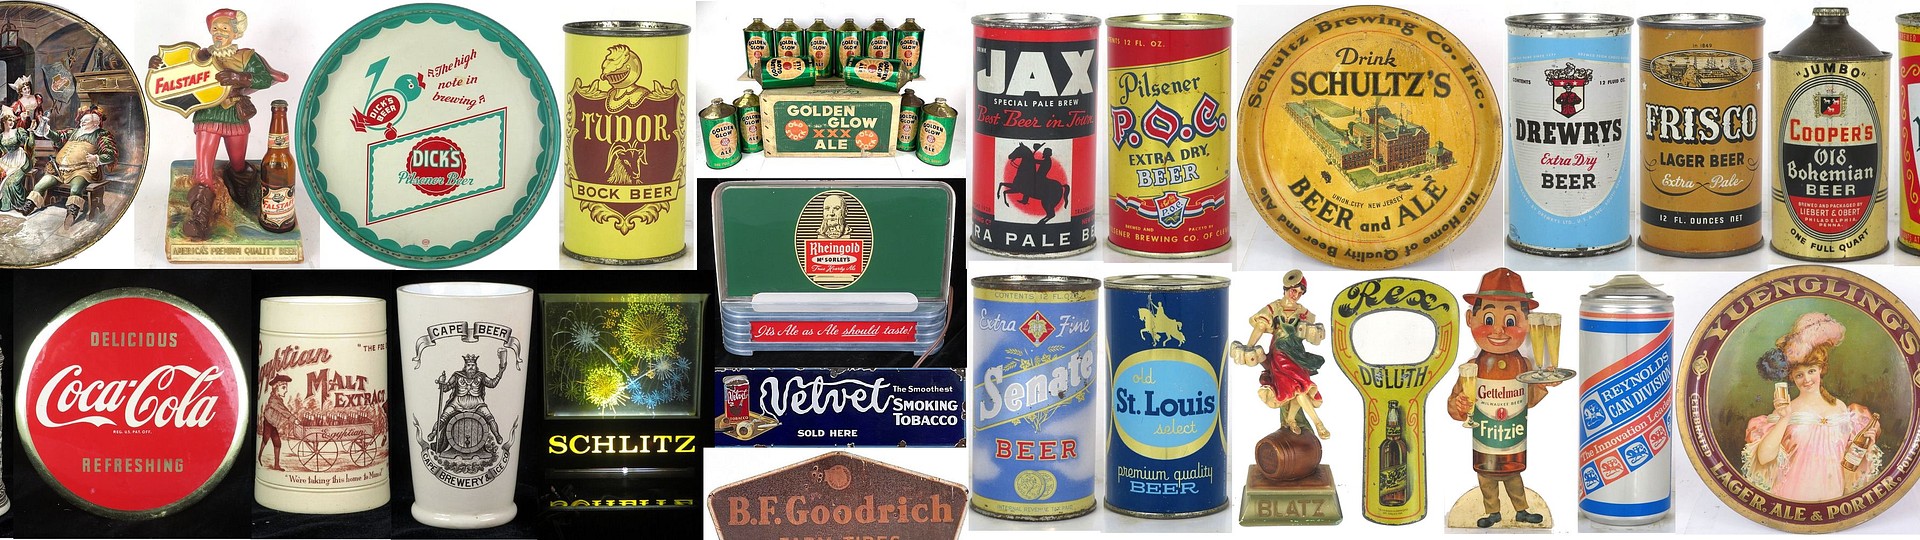 TavernTrove's September Beer Can and Breweriana Auction! by TavernTrove